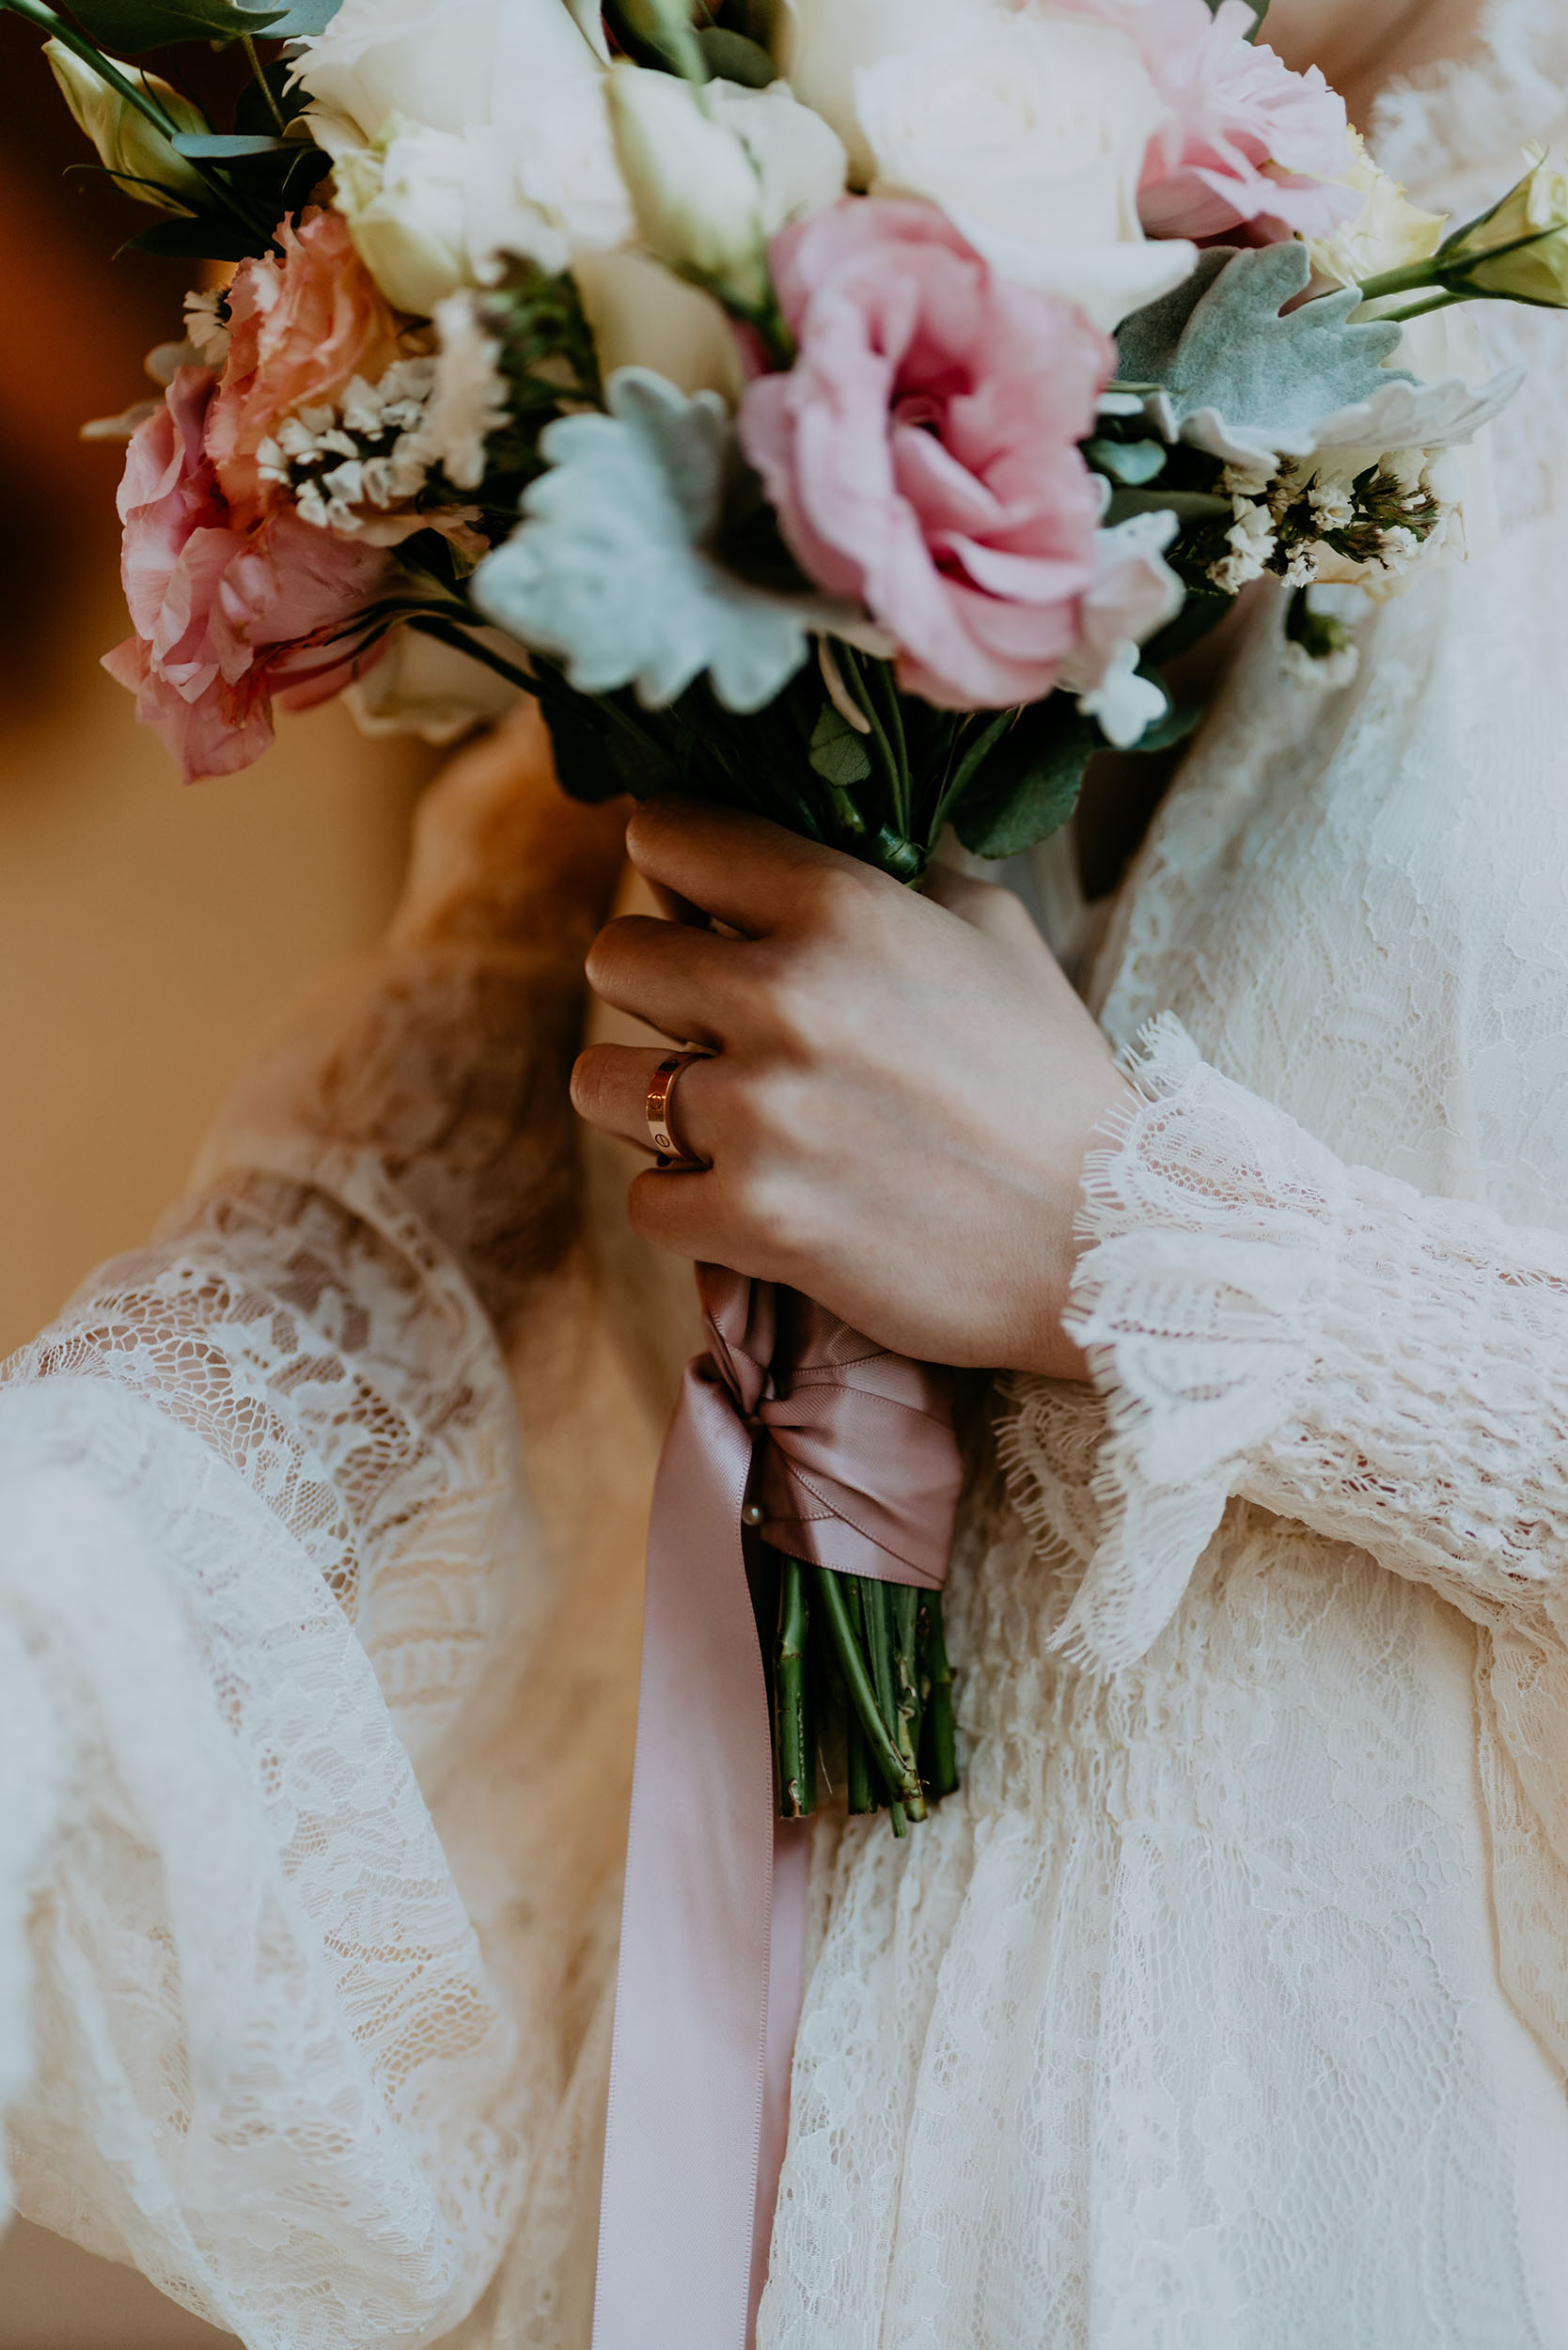 Close up of bride's hand holding a bouquet with pink lisianthks flowers